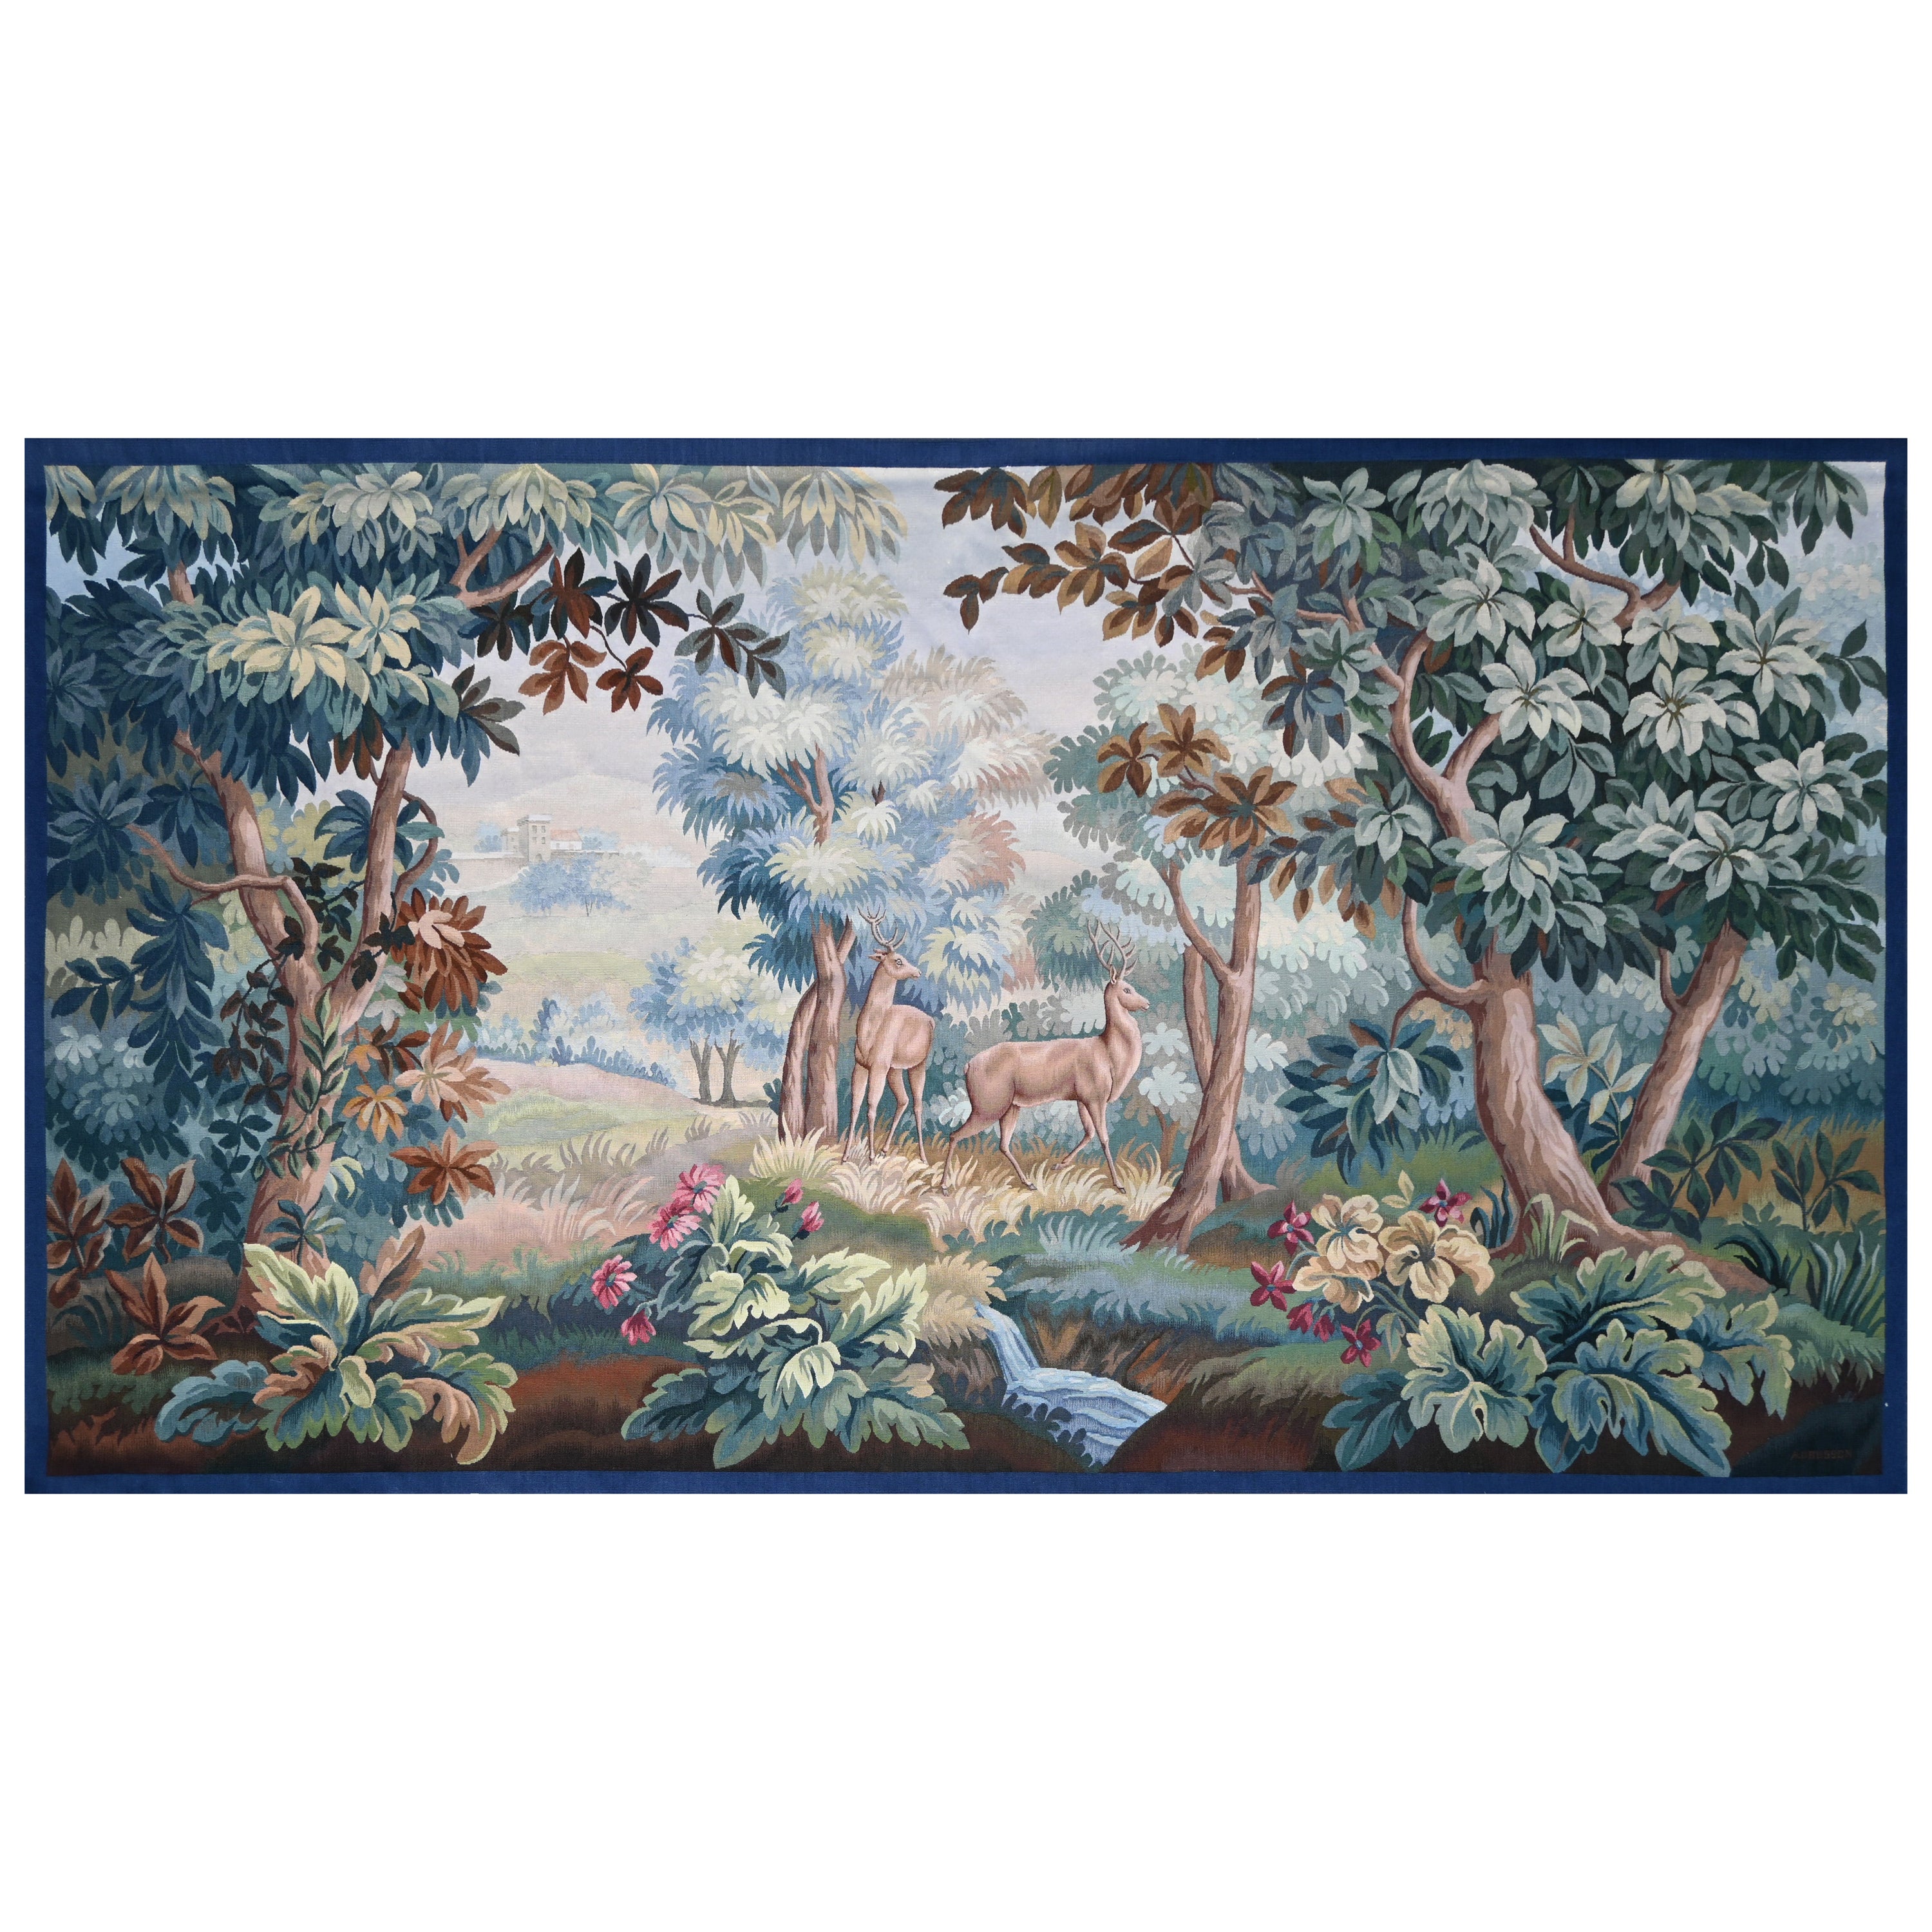 Verdure Aubusson tapestry signed - Couple of Deer in an Undergrowth - No. 1414 For Sale